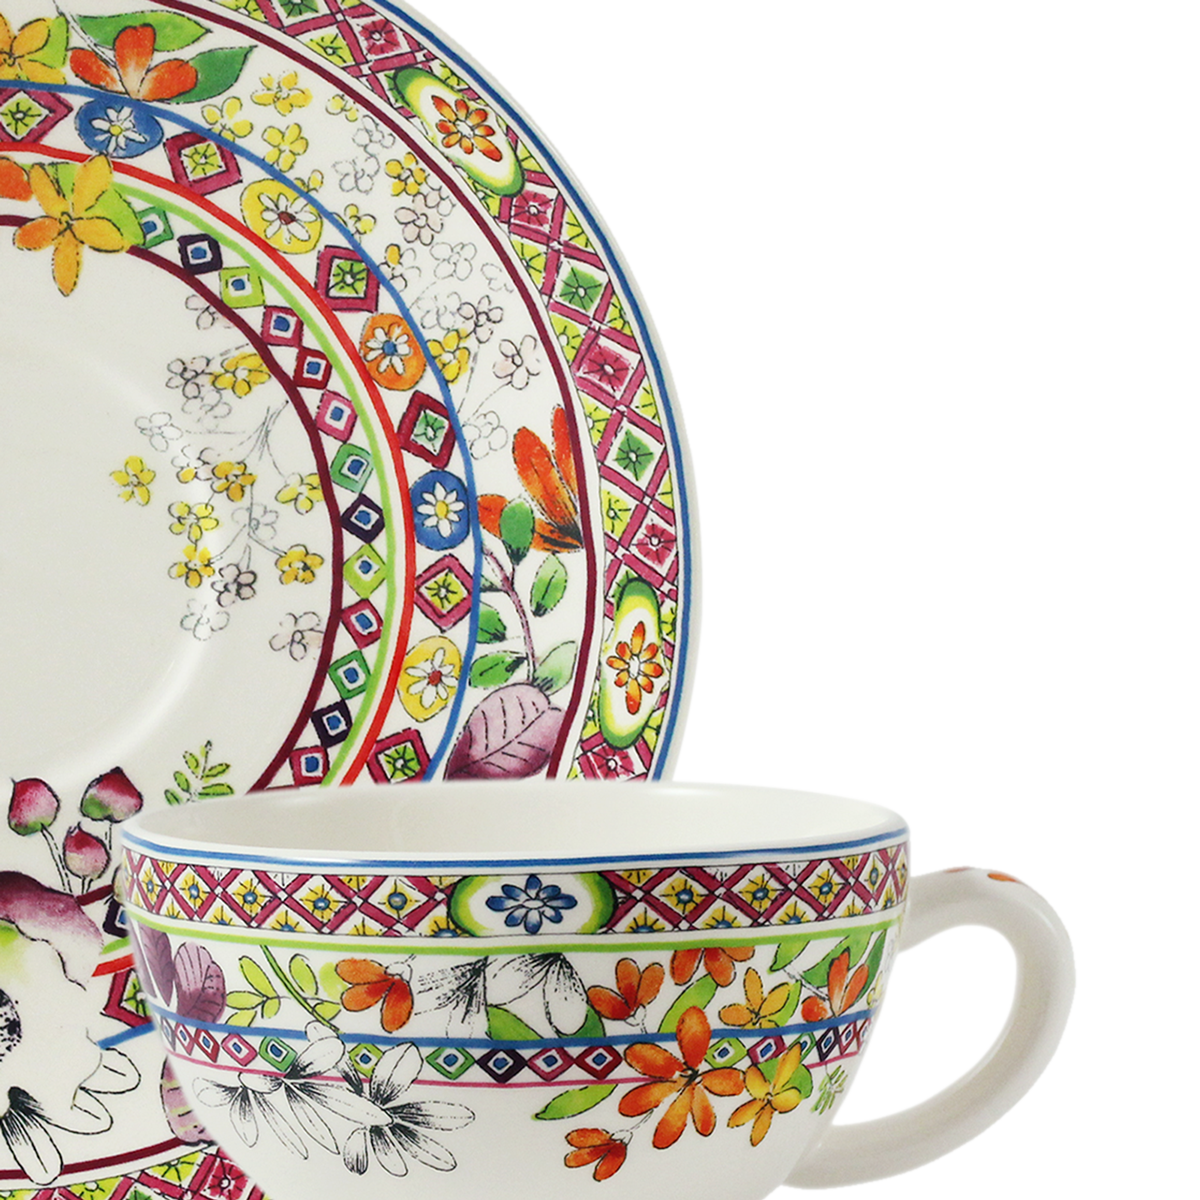 Bagatelle Breakfast Cup & Saucer